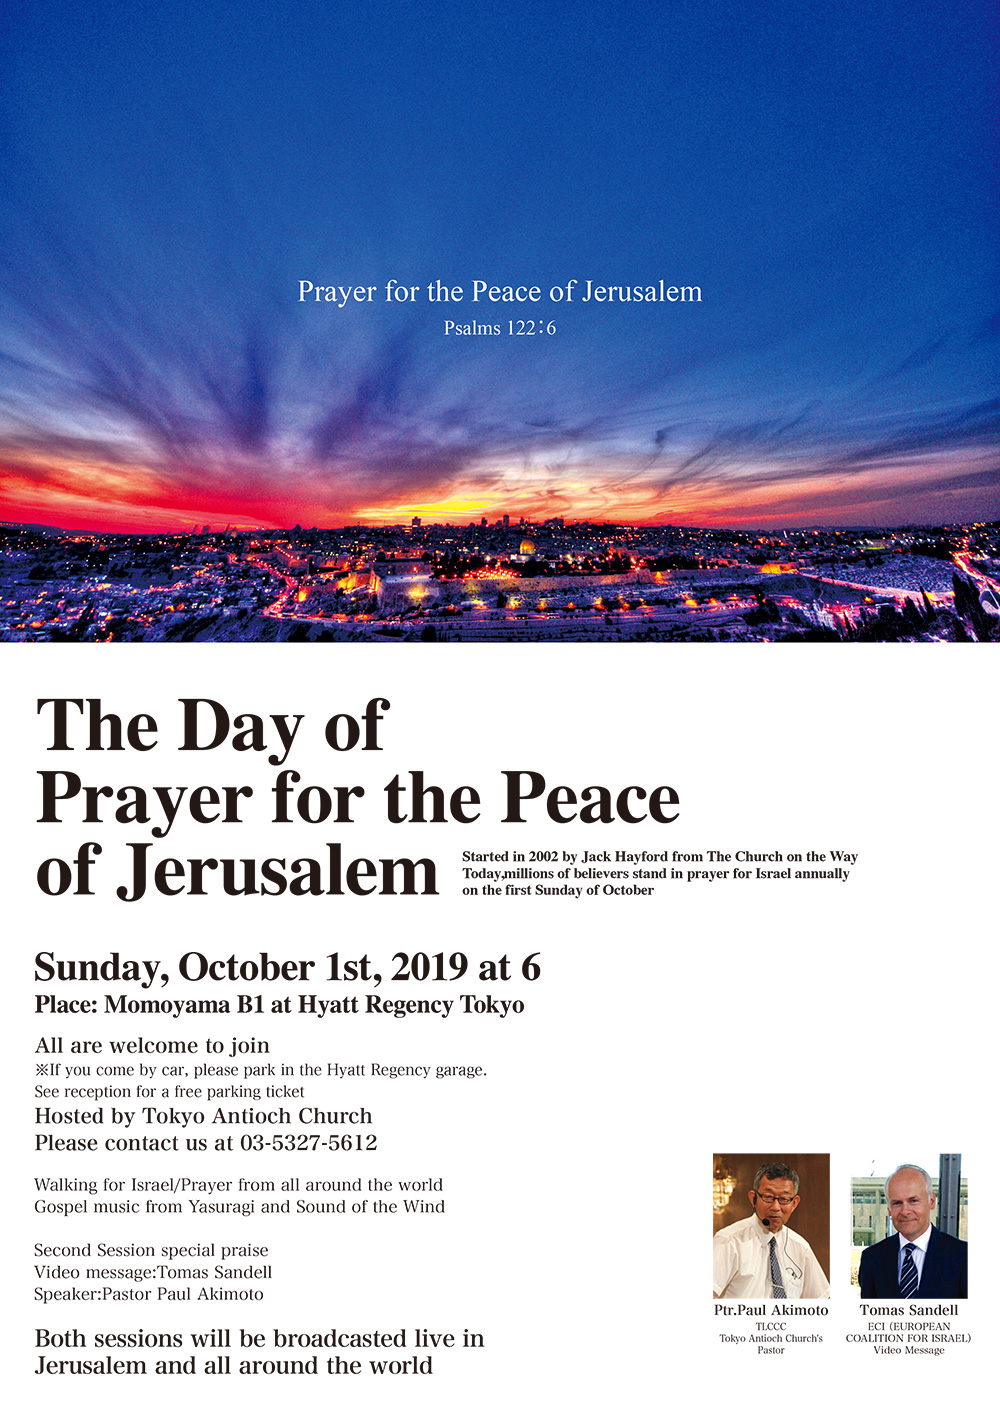  The Day of Prayer for the Peace of Jerusalem